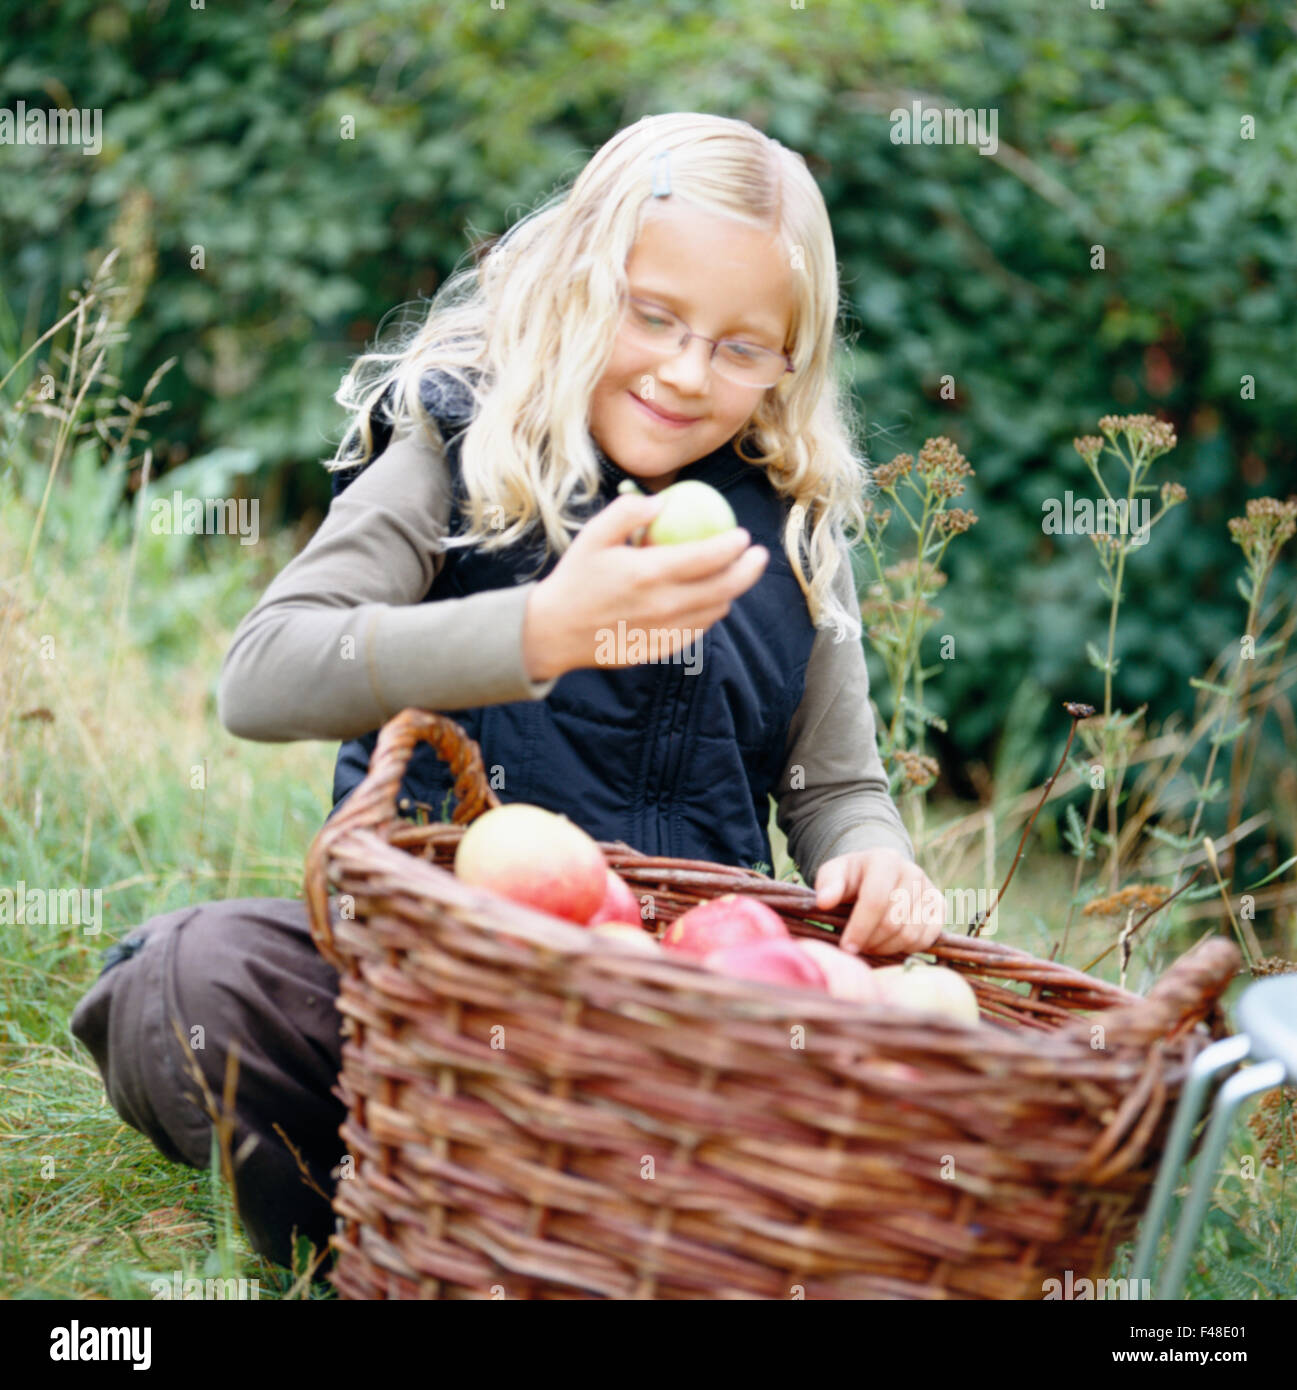 Girl with a basket of apples, Sweden. Stock Photo